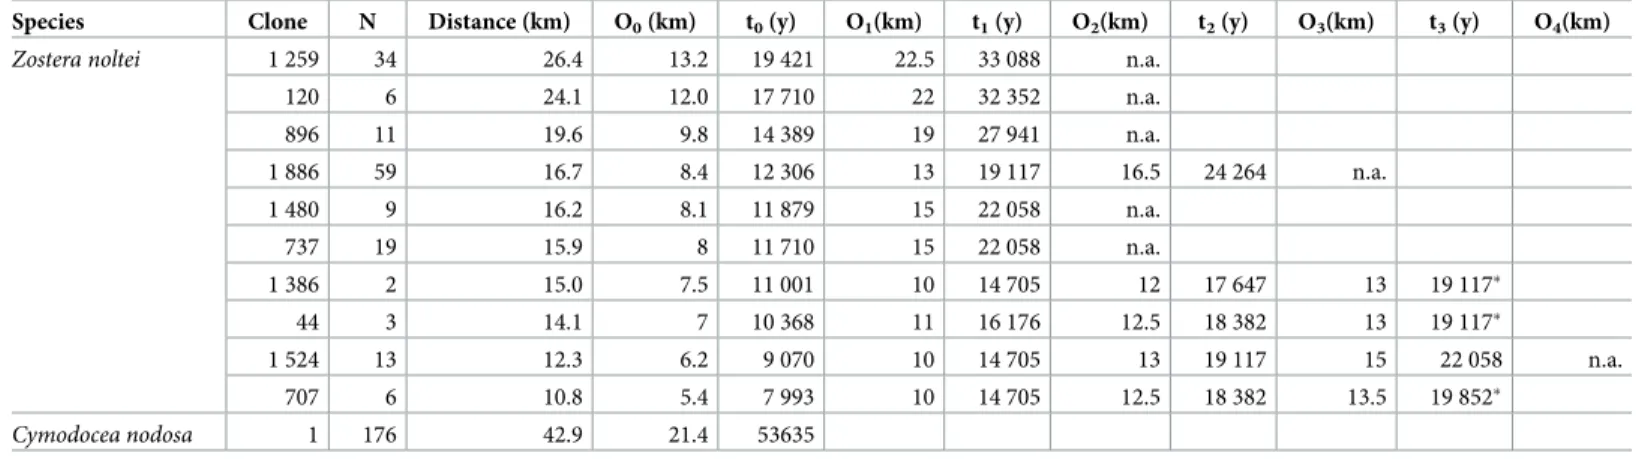 Table 1. Age estimation for the ten largest clones of Zostera noltei assuming no asexual hydrochory